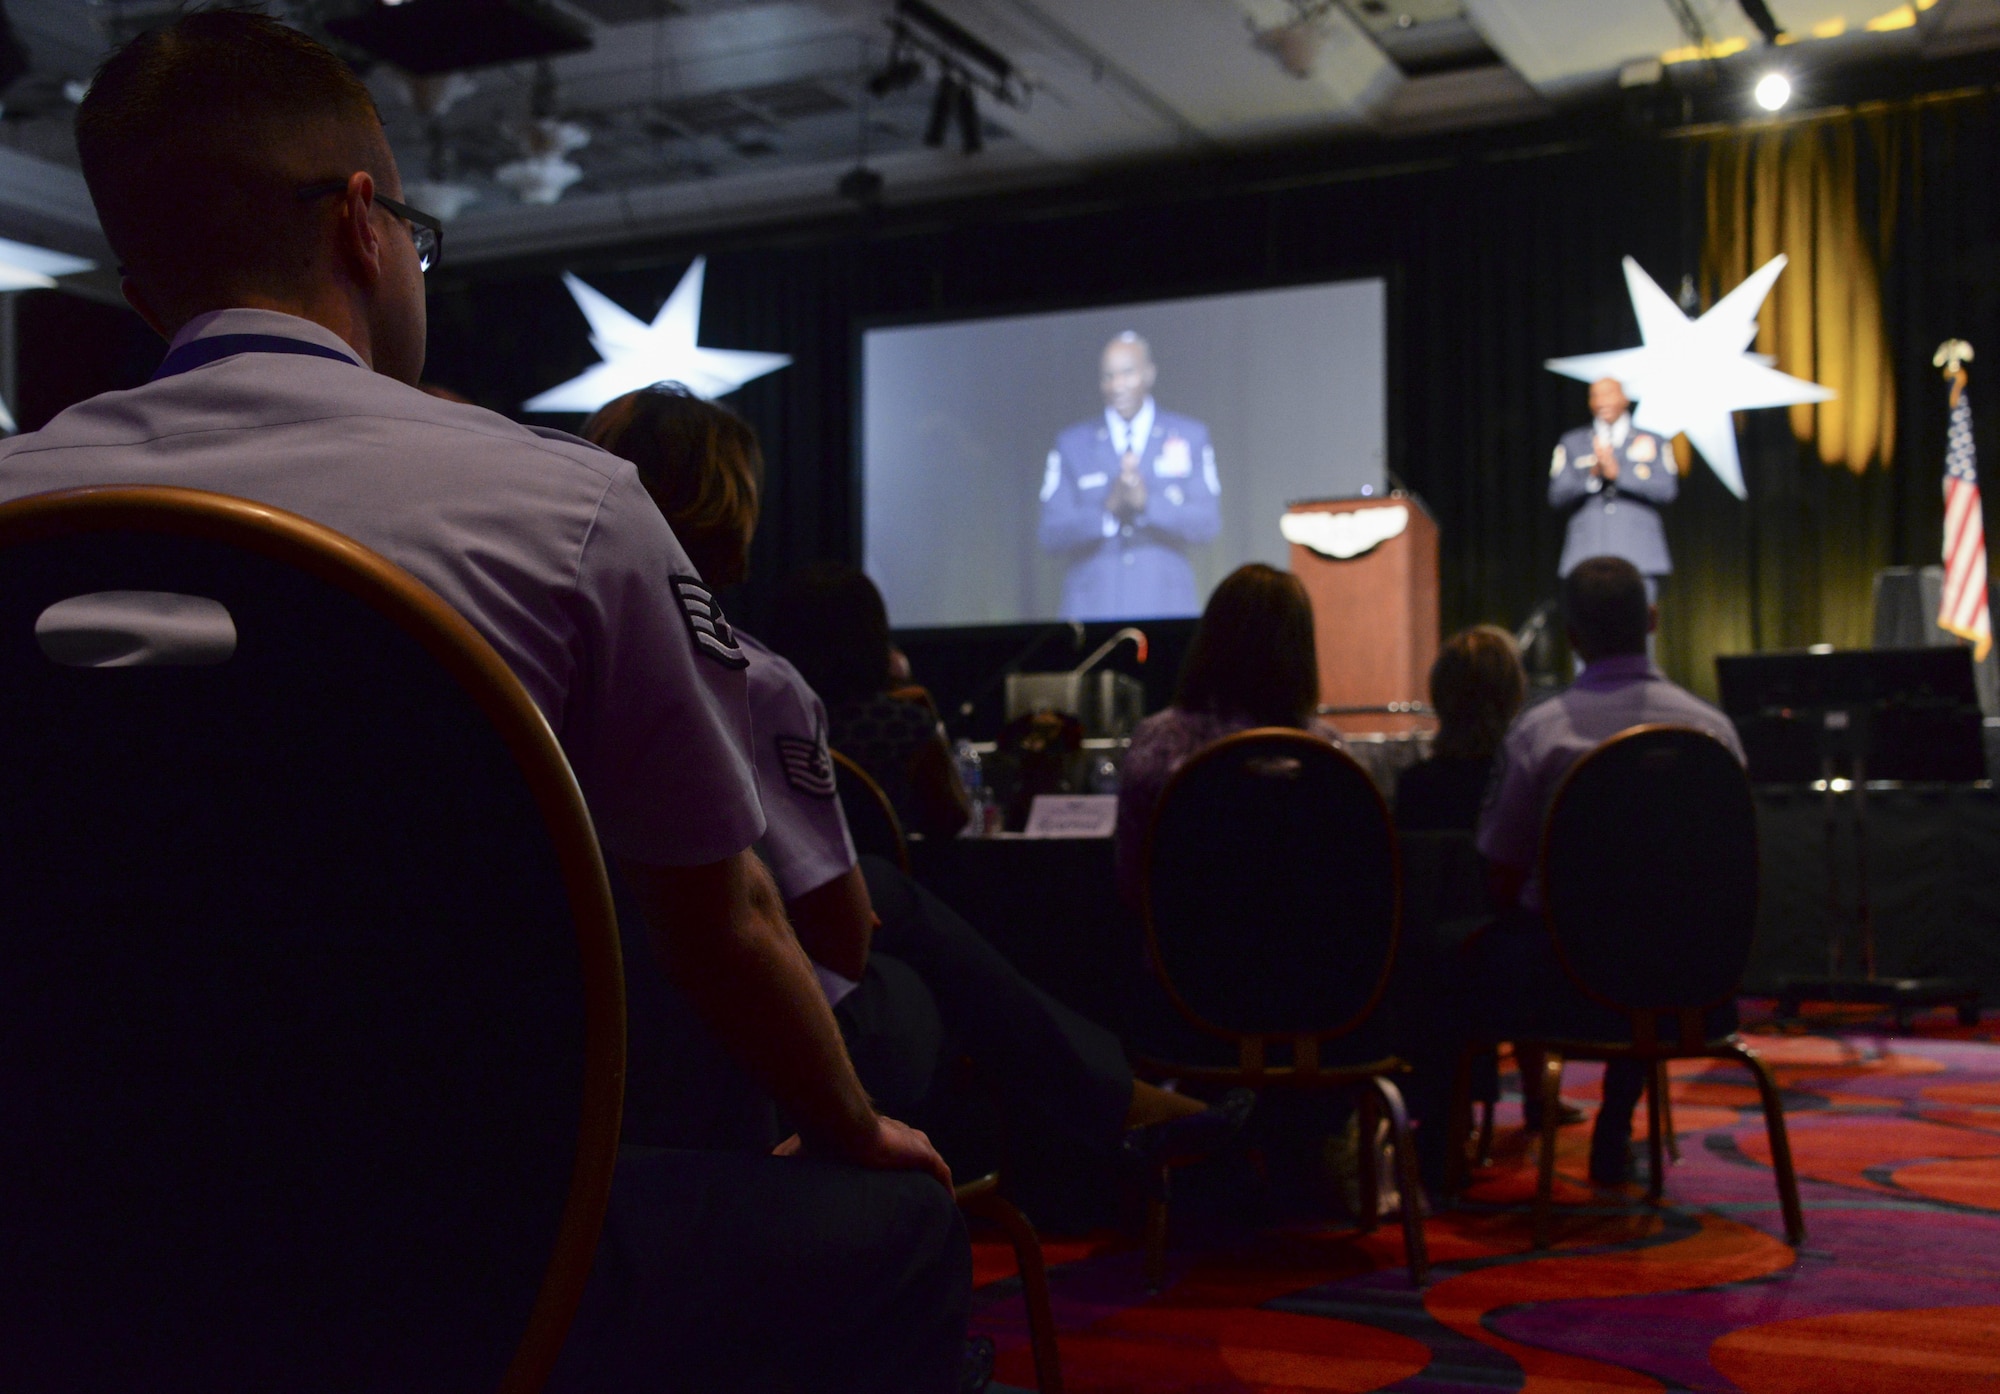 Chief Master Sergeant of the Air Force Kaleth O. Wright speaks to Airmen at a professional development forum July 24 during the Air Force Sergeants Association International Convention held in Reno, Nevada. The Professional Airman's Conference provided the opportunity for Airmen to learn from past and present enlisted leadership. (U.S. Air Force photo by Senior Airman Amber Carter)